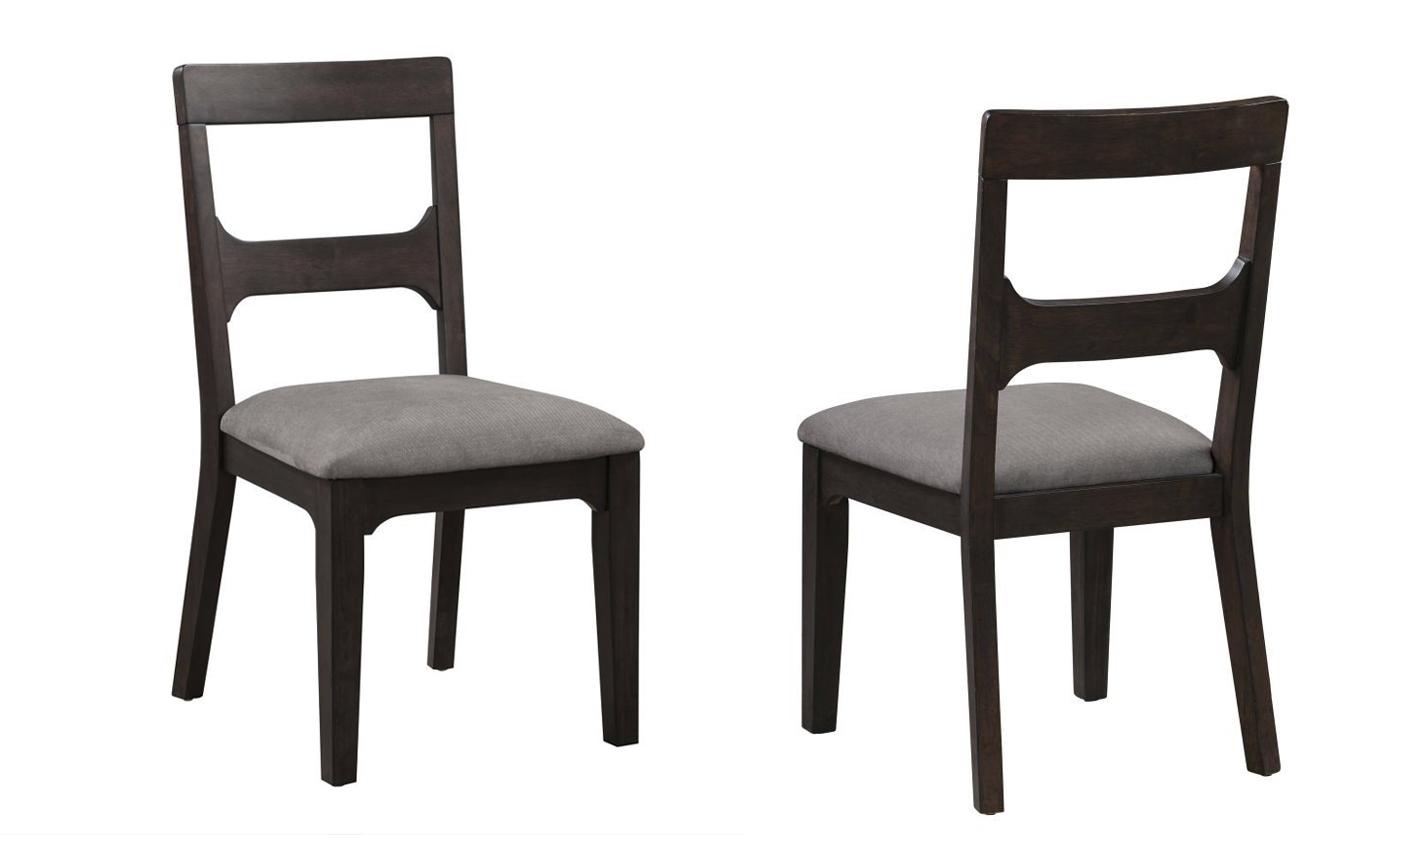 Modus Furniture BRYCE Dining Chair Set